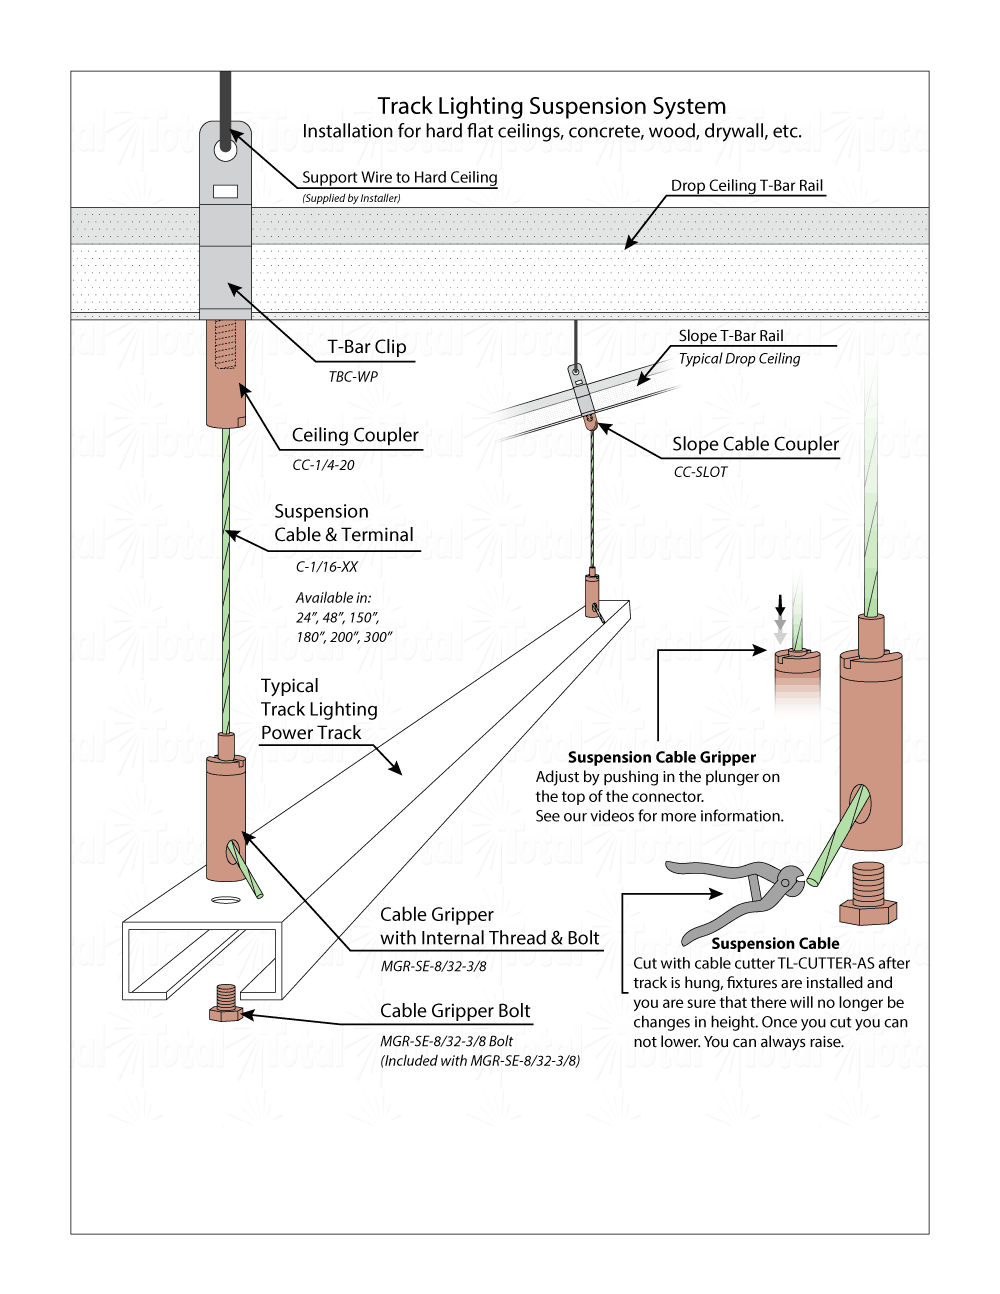 Track Lighting Suspension System Drop Ceiling Technical Diagram